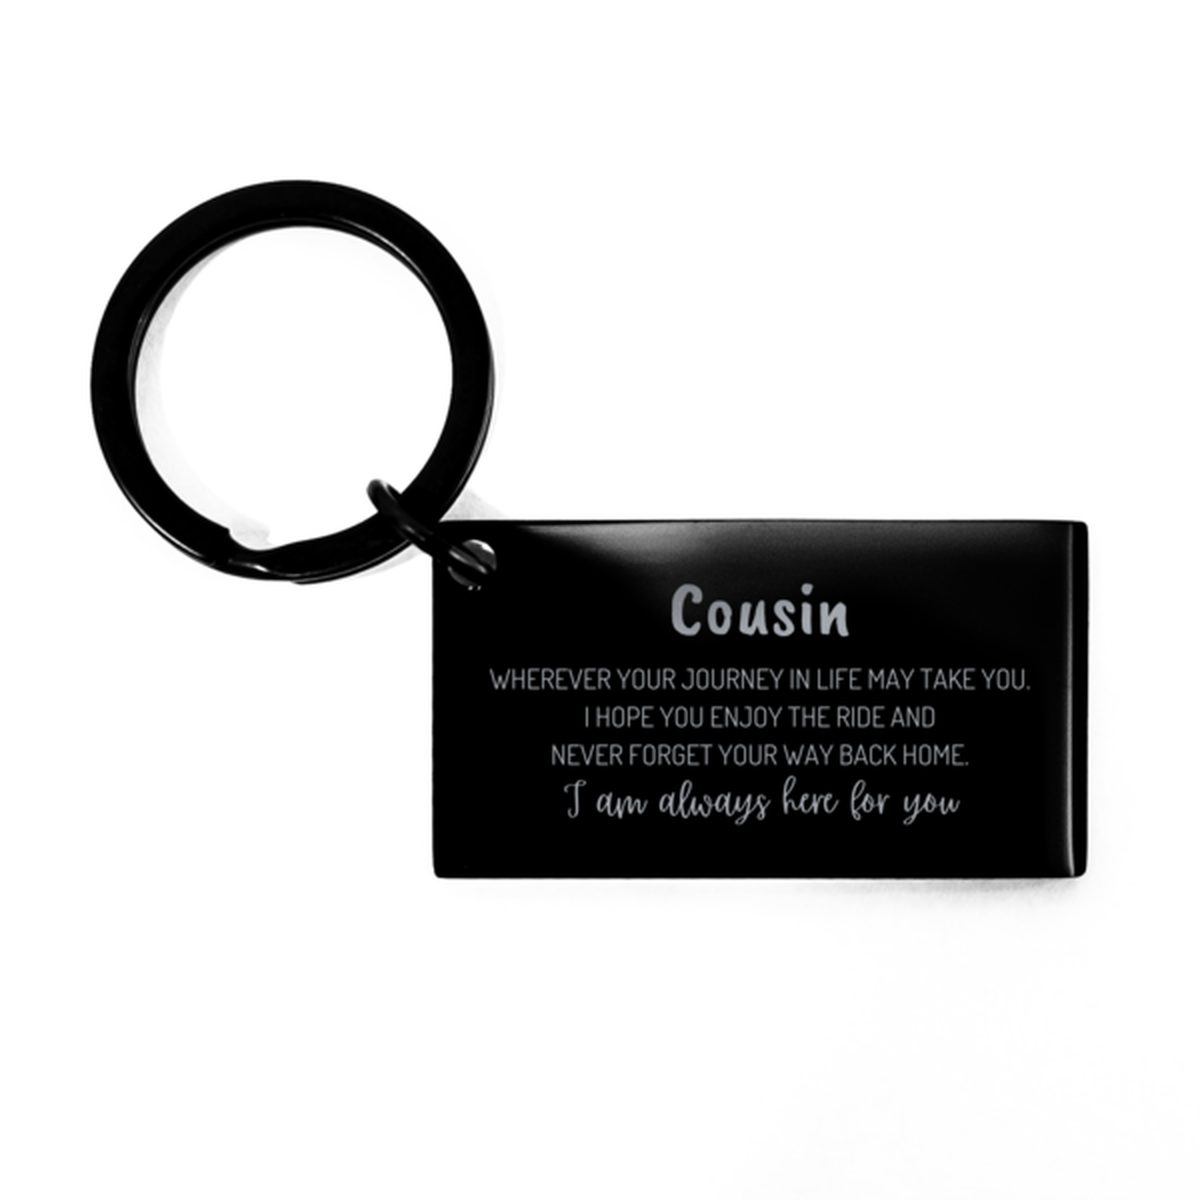 Cousin wherever your journey in life may take you, I am always here for you Cousin Keychain, Awesome Christmas Gifts For Cousin, Cousin Birthday Gifts for Men Women Family Loved One